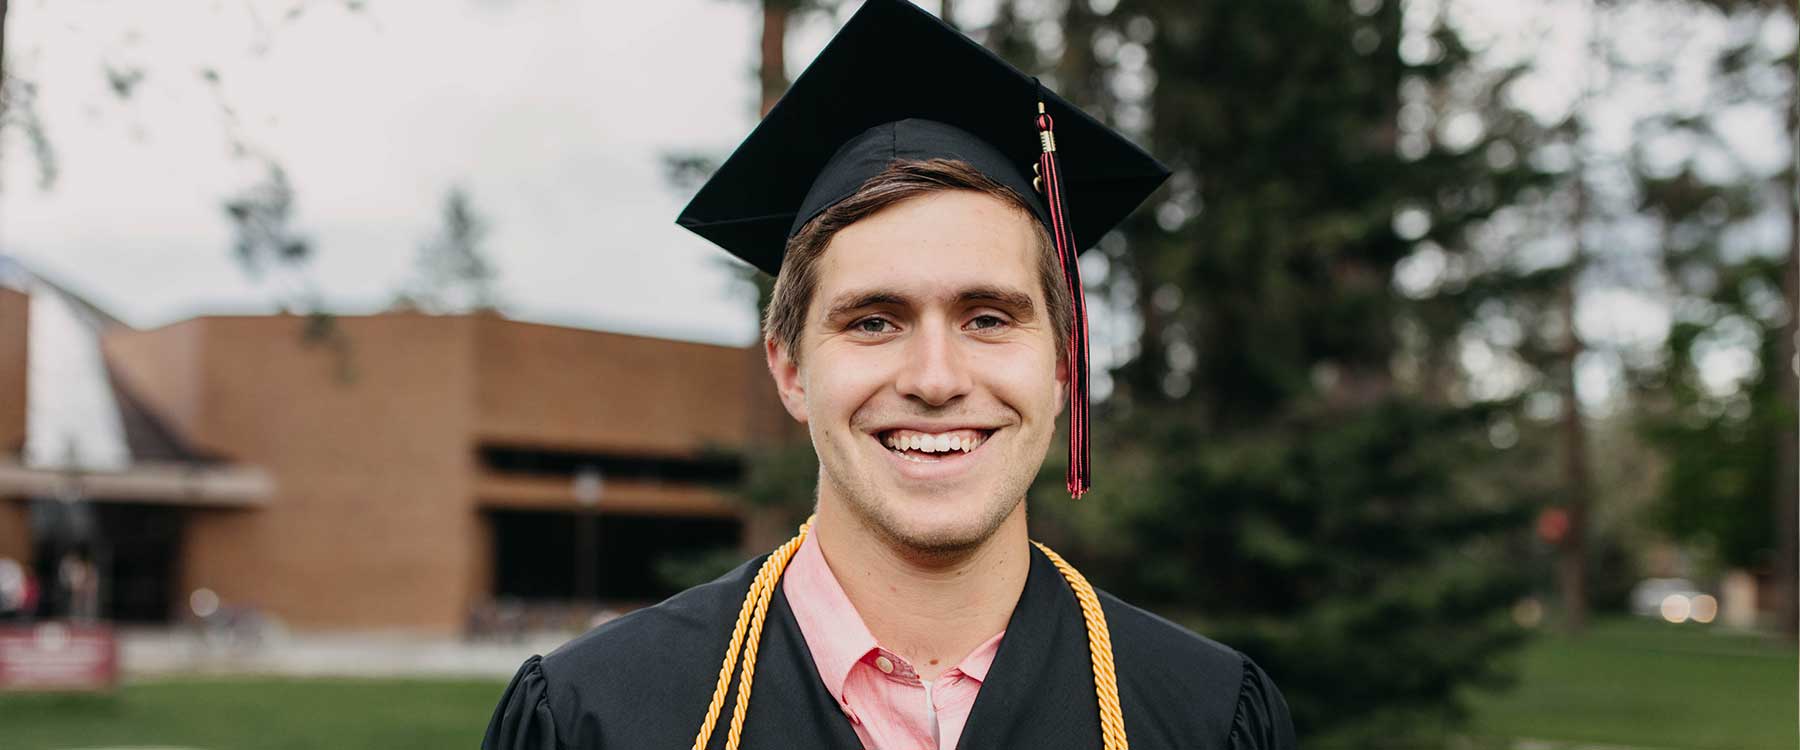 Micah stands in front of the HUB wearing his graduation robes and cap. He smiles at the camera.